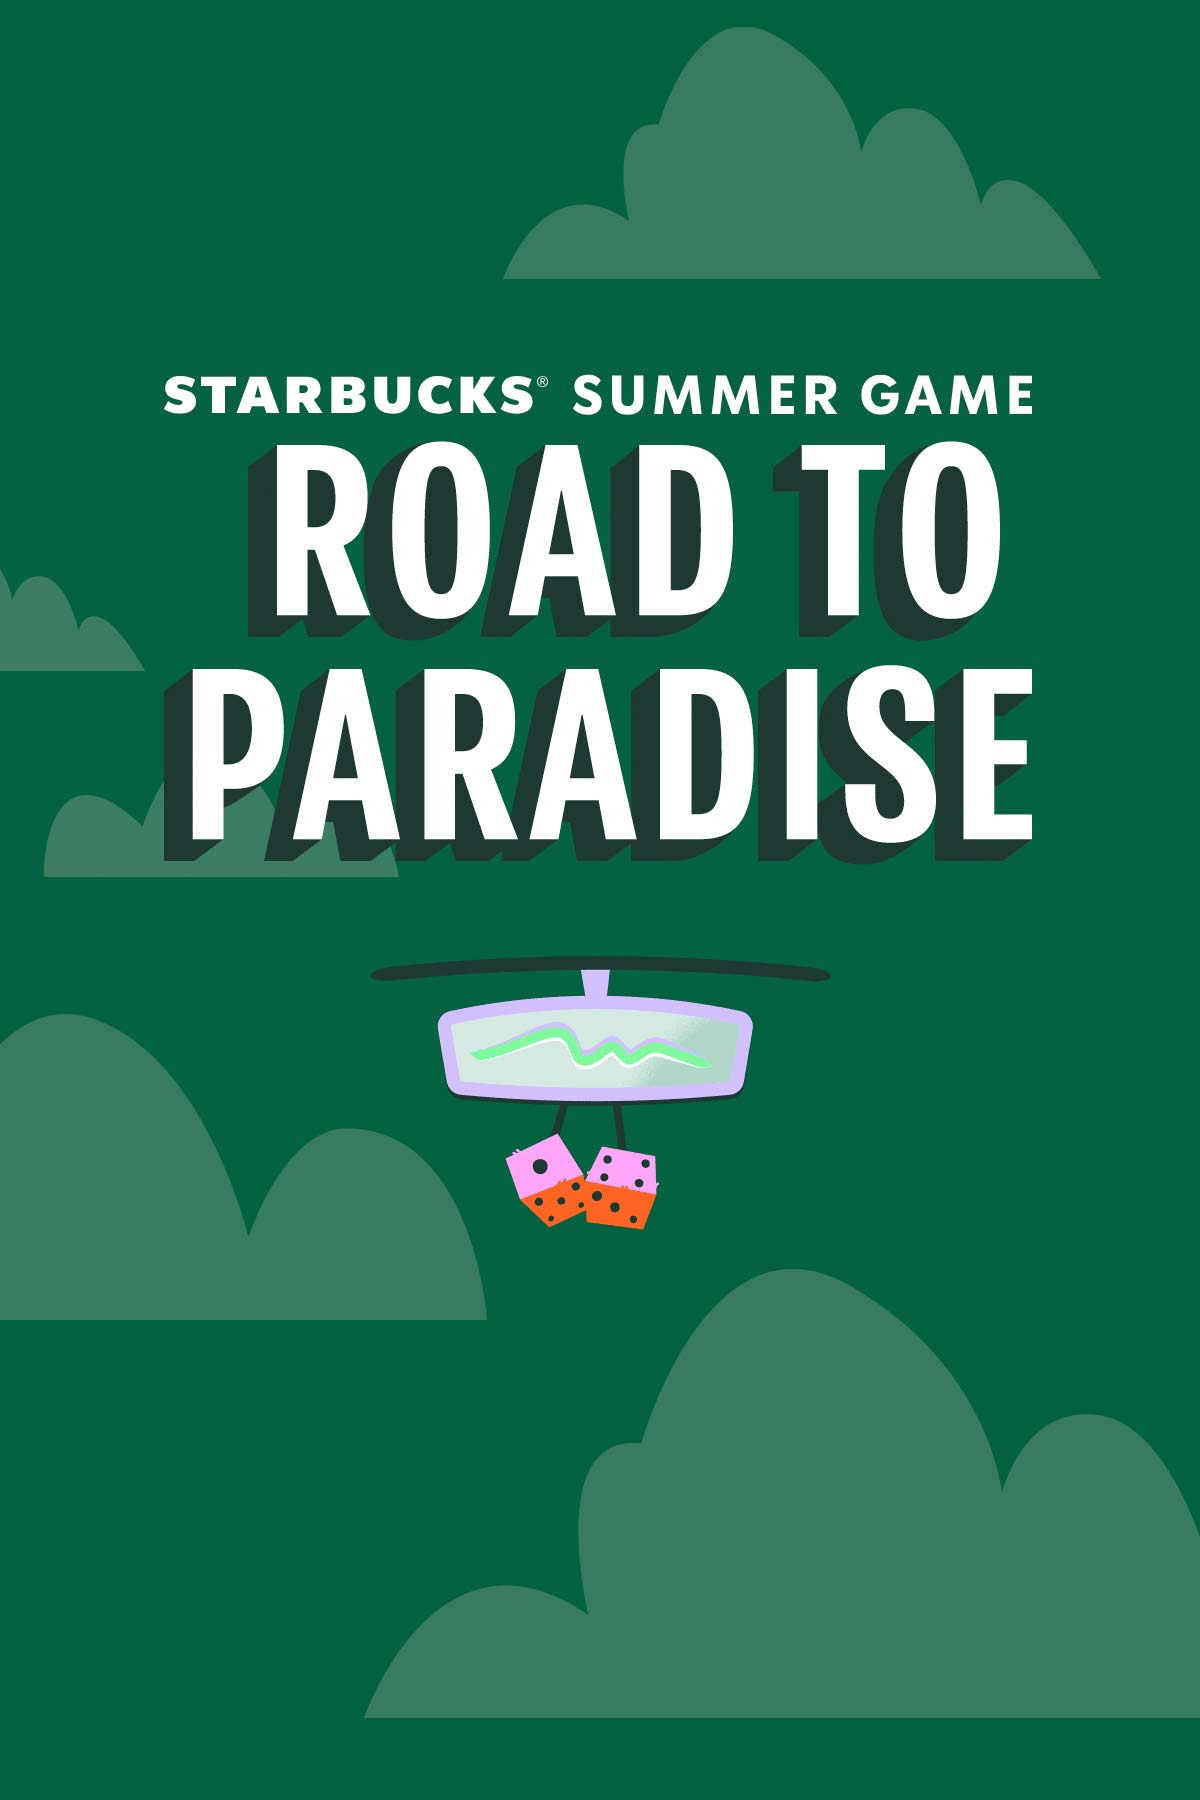 Starbucks Summer Game Road to Paradise text on green background.